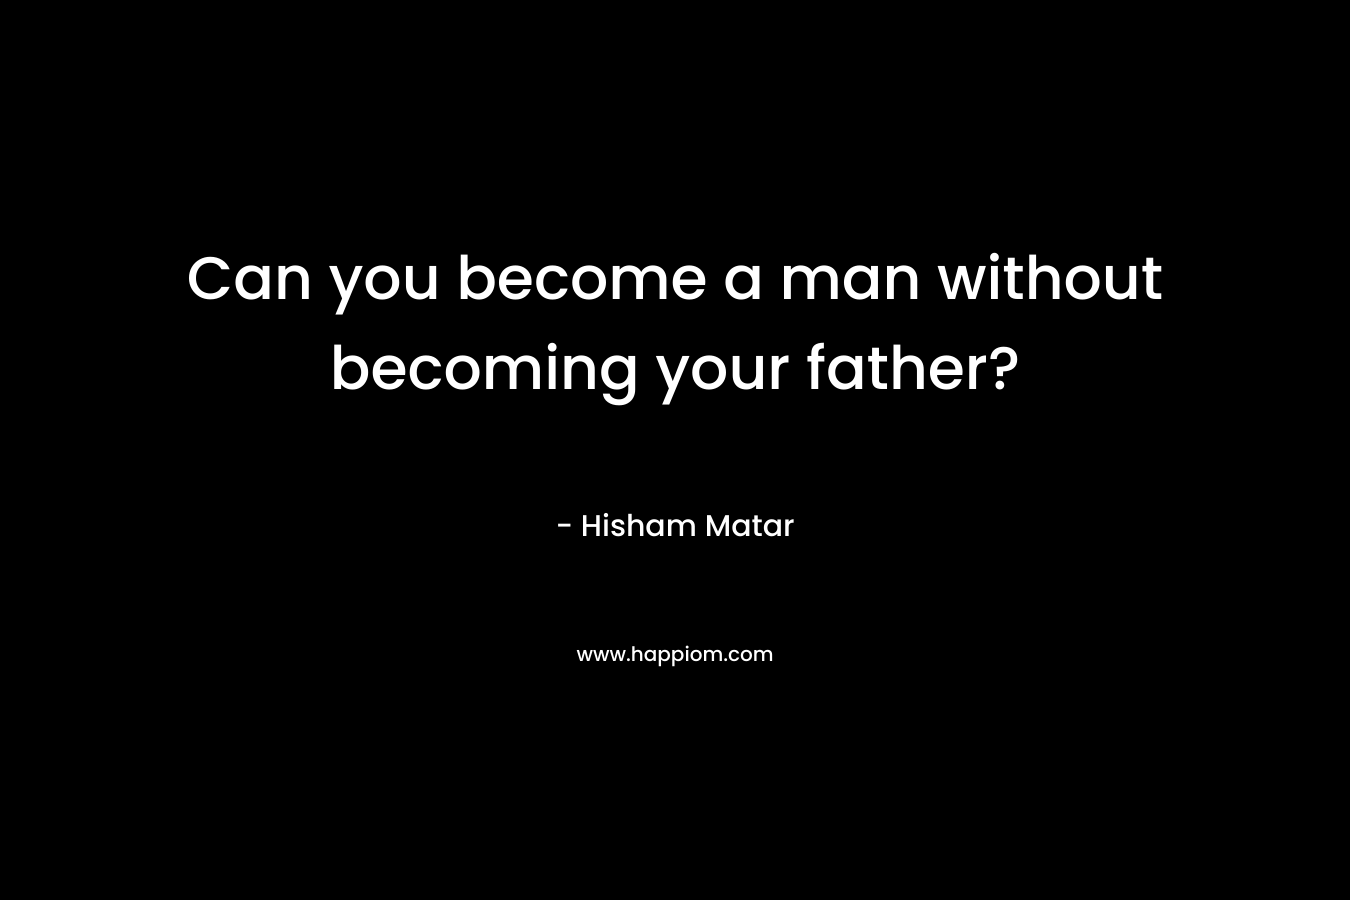 Can you become a man without becoming your father?